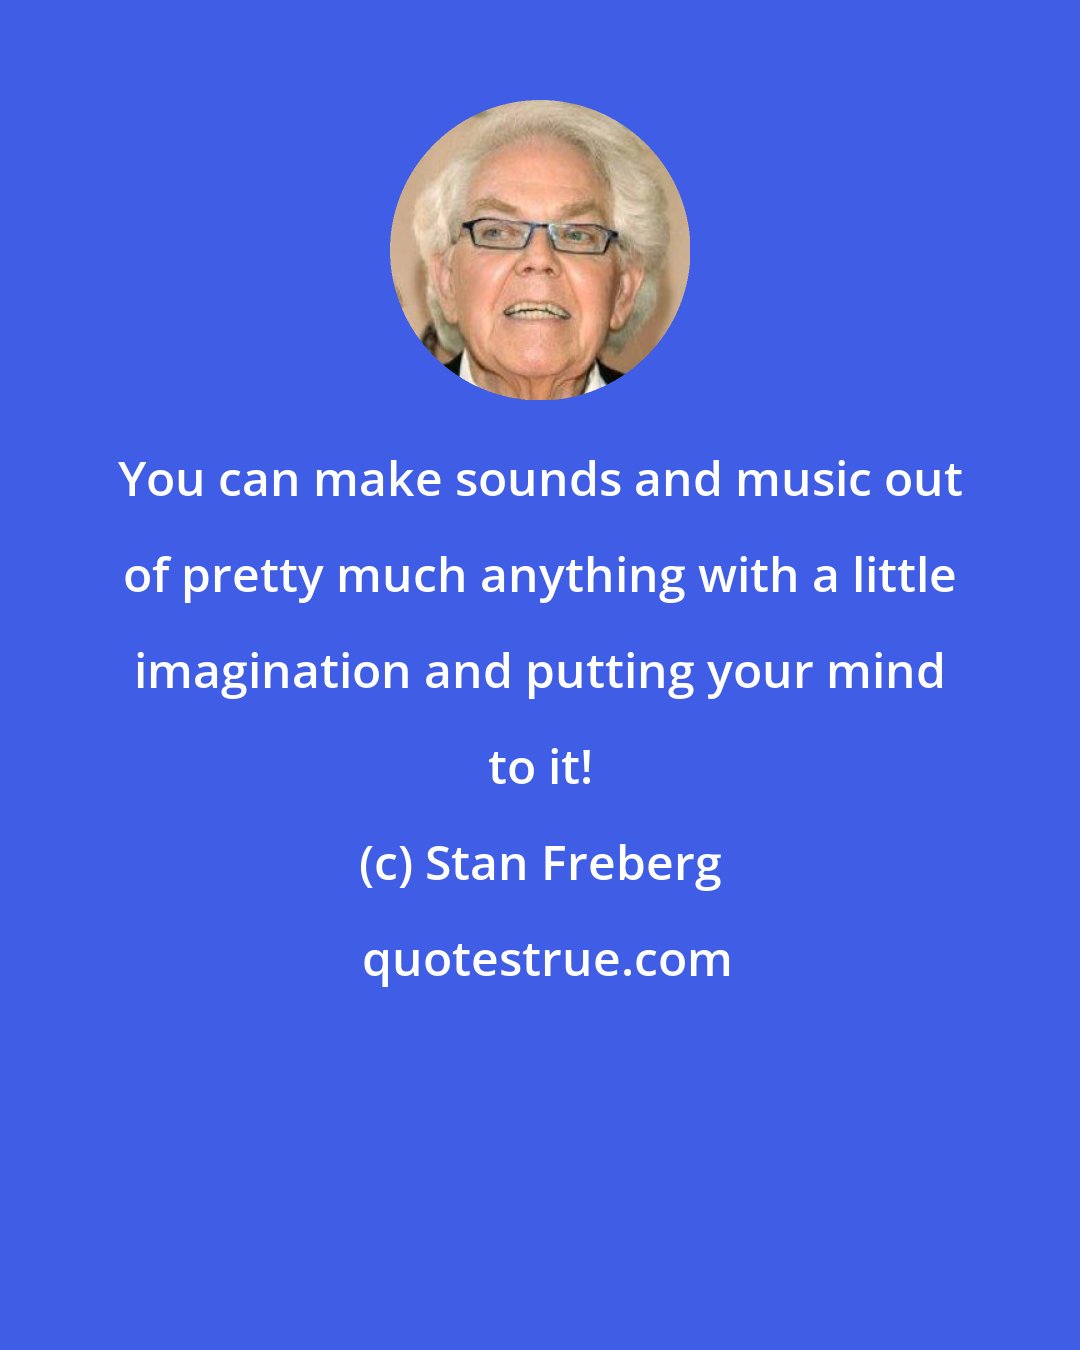 Stan Freberg: You can make sounds and music out of pretty much anything with a little imagination and putting your mind to it!